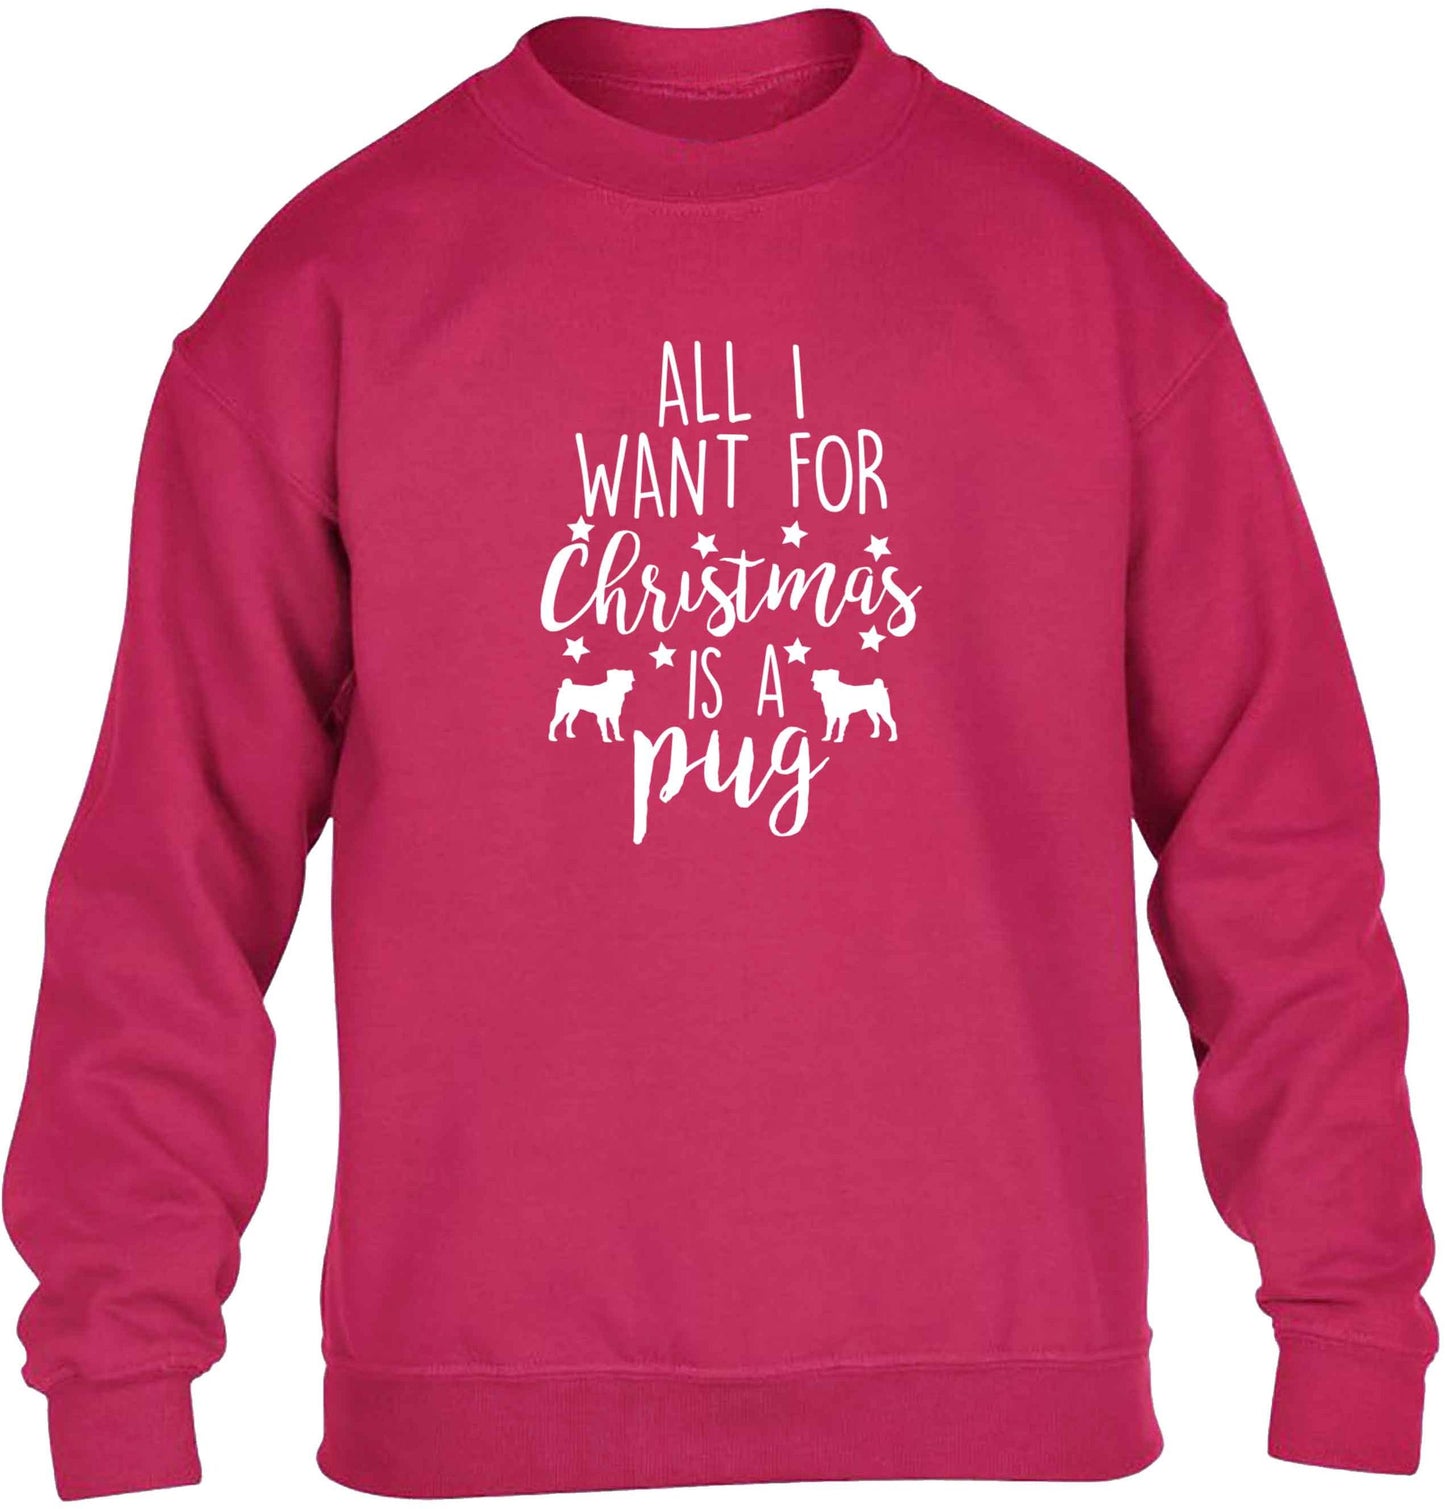 All I want for Christmas is a pug children's pink sweater 12-13 Years